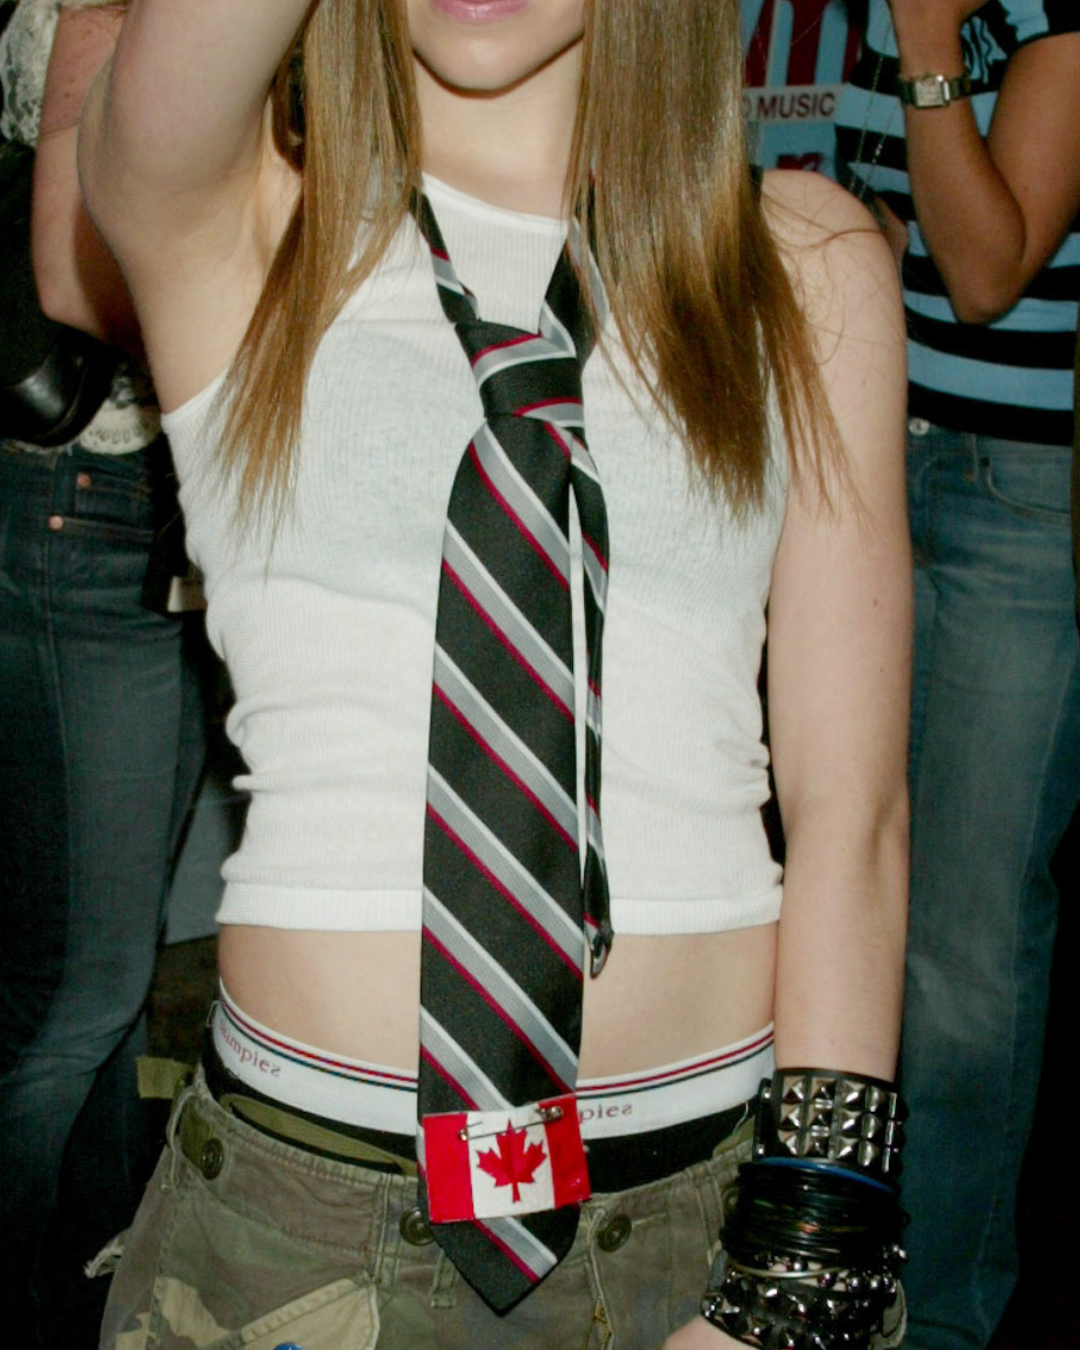 A close-up of Avril Lavigne&#x27;s oversized tie